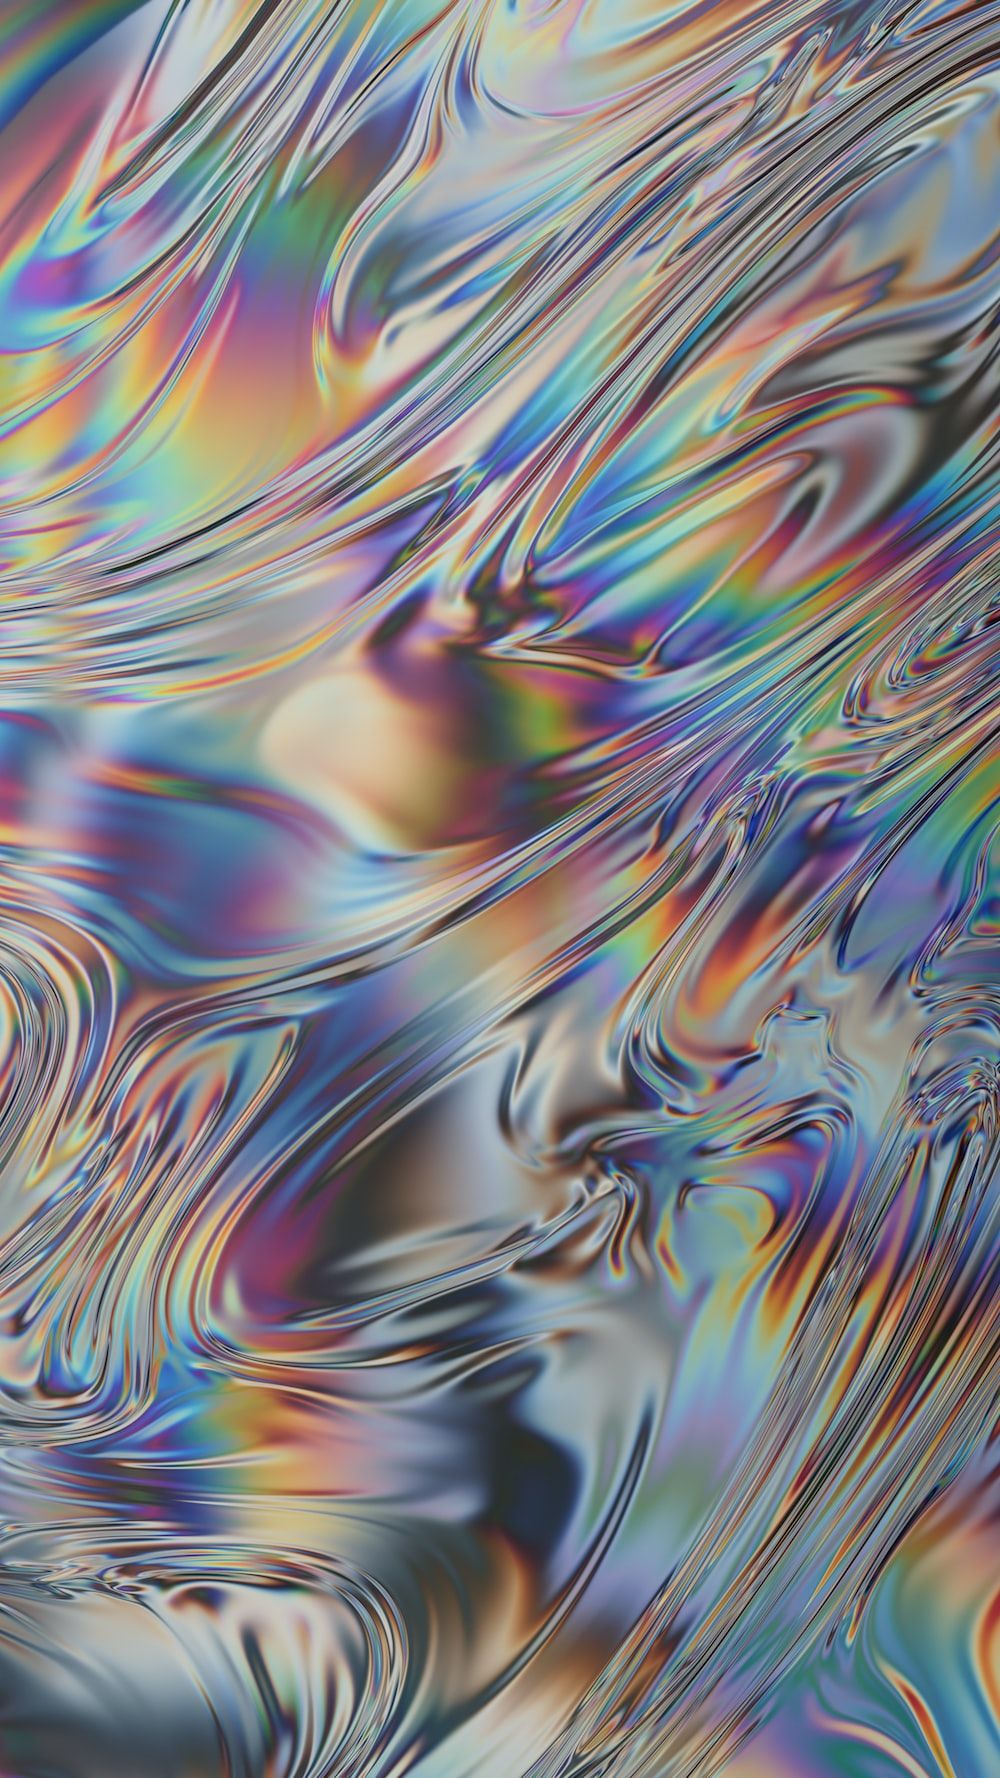 A photograph of a reflective surface with a rainbow of colors. - Iridescent